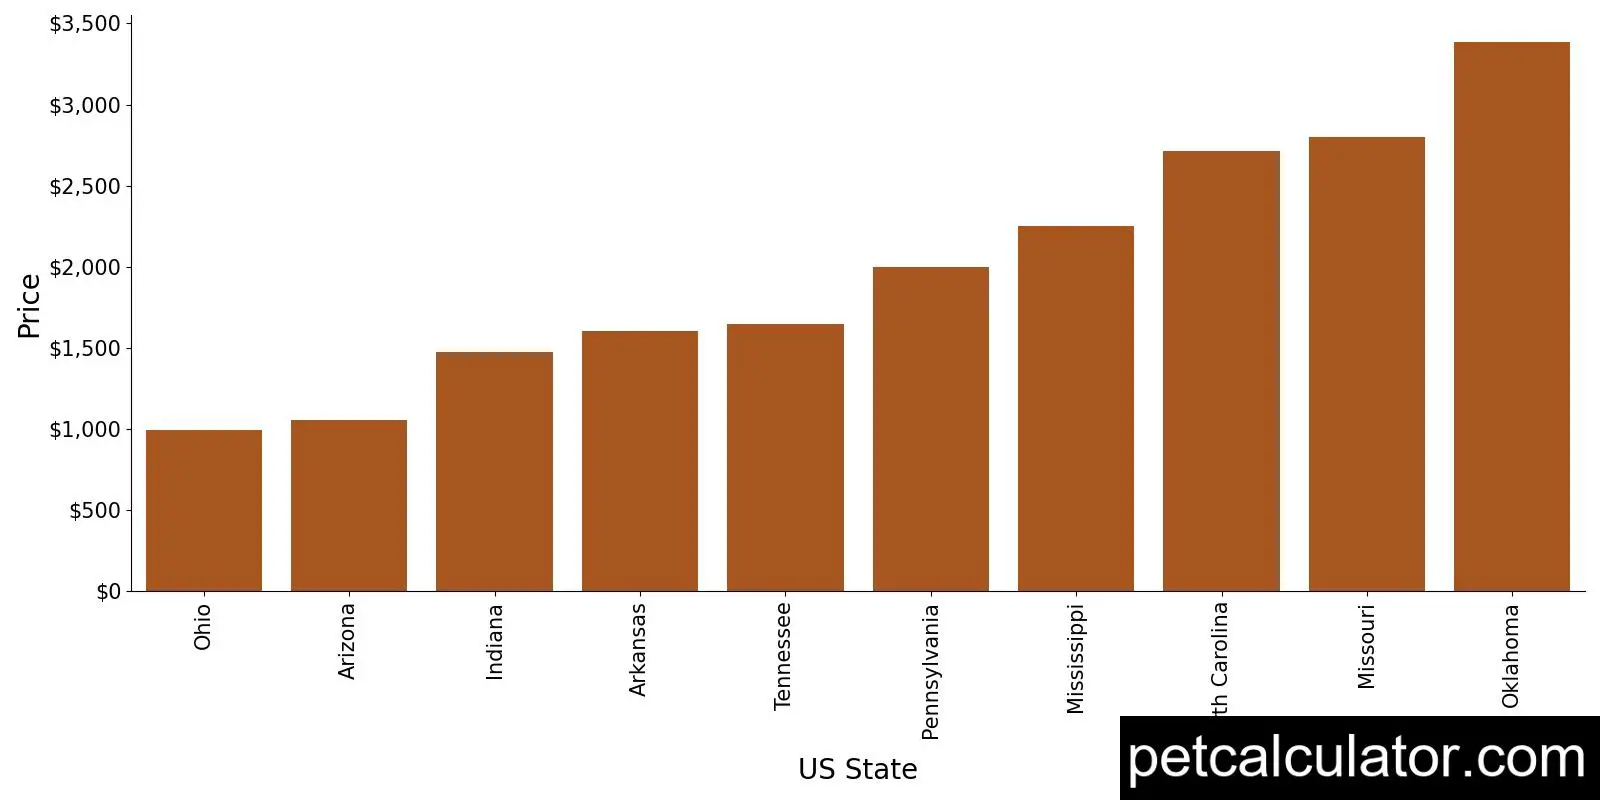 Price of Shepadoodle by US State 